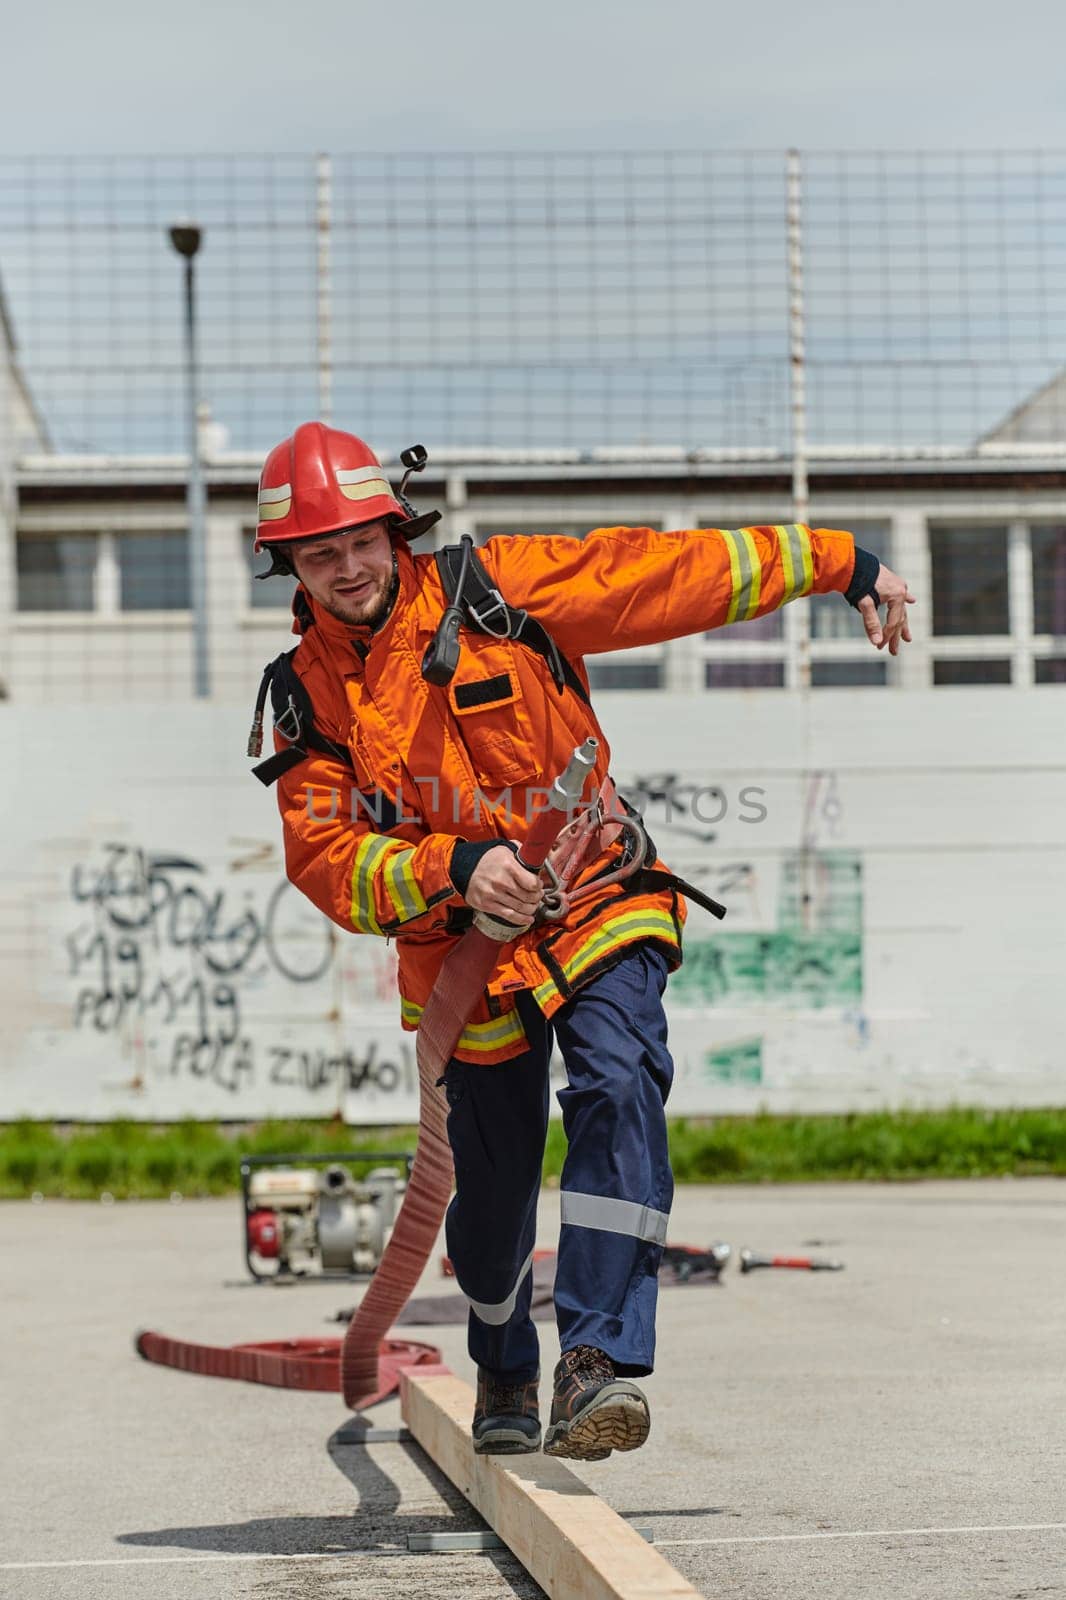 A firefighter, clad in professional gear, undergoes rigorous training to prepare for the hazards awaiting him on duty